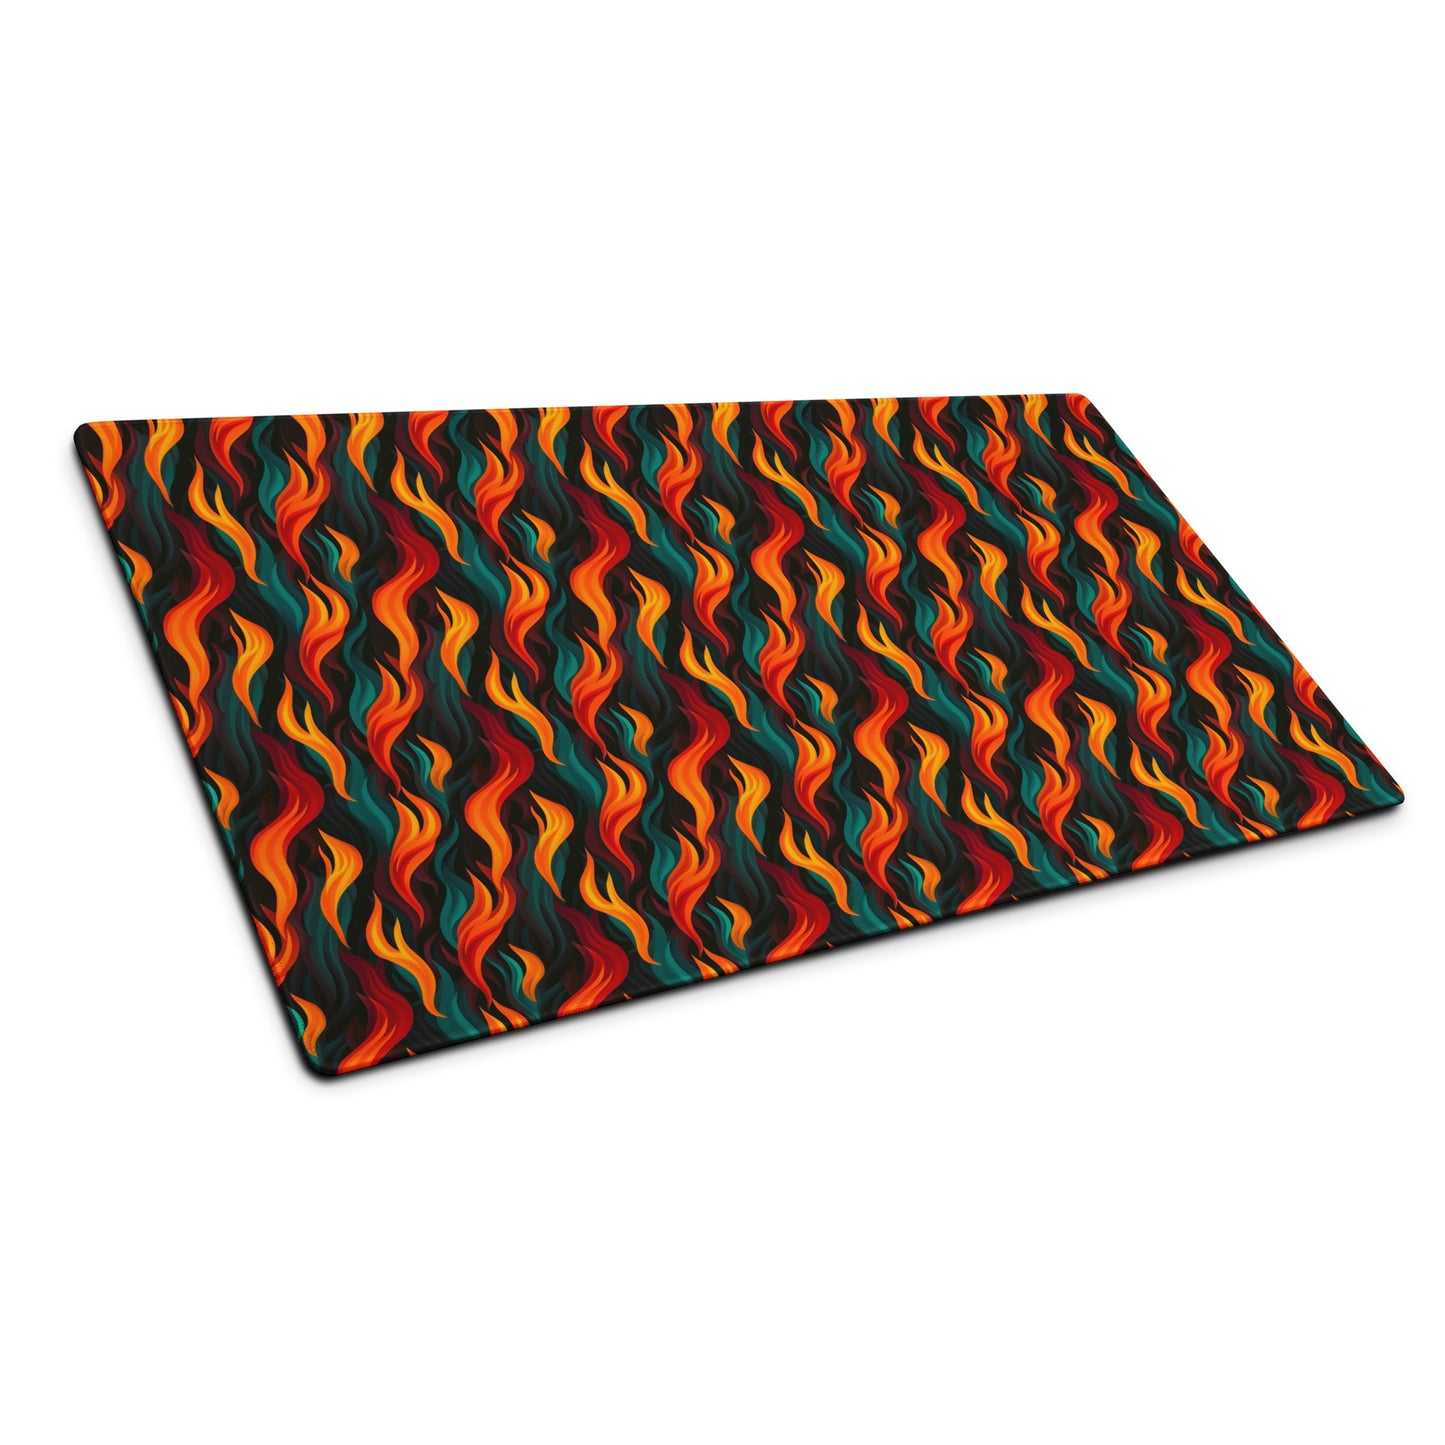 A 36" x 18" desk pad with a wavy flame pattern on it shown at an angle. Red and Teal in color.